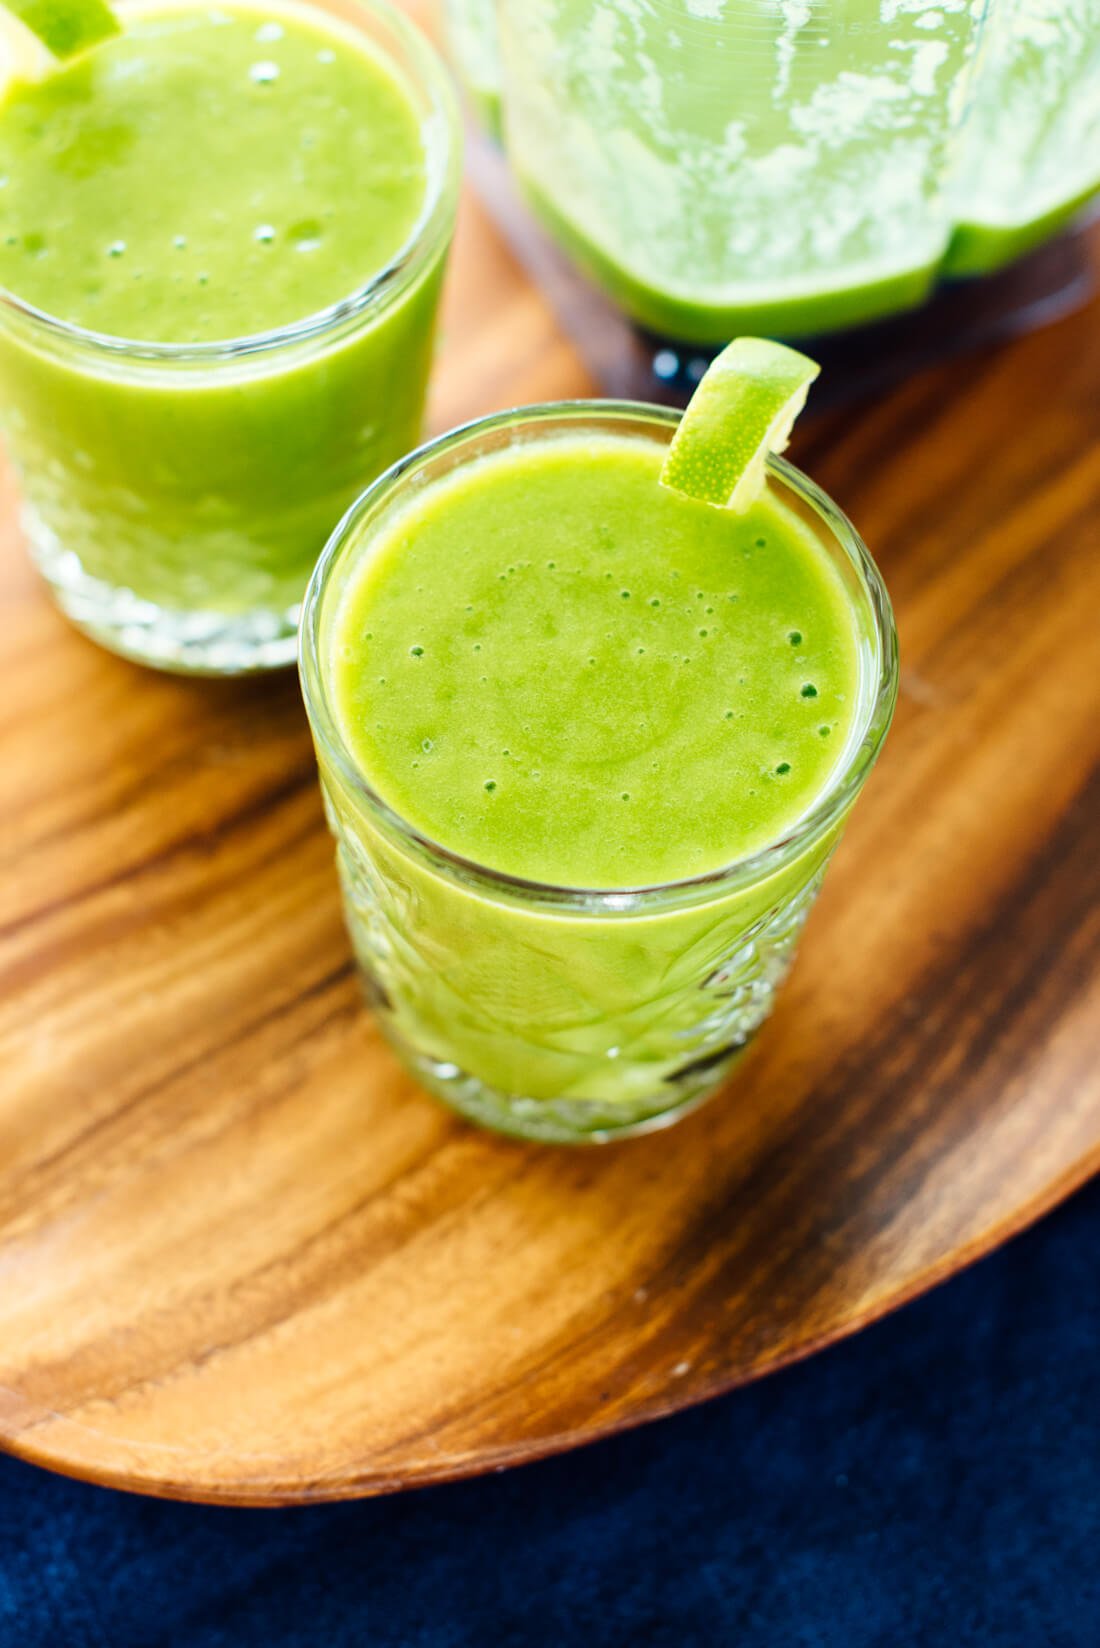 This mango green smoothie recipe tastes like a treat! Your whole family will love it. cookieandkate.com